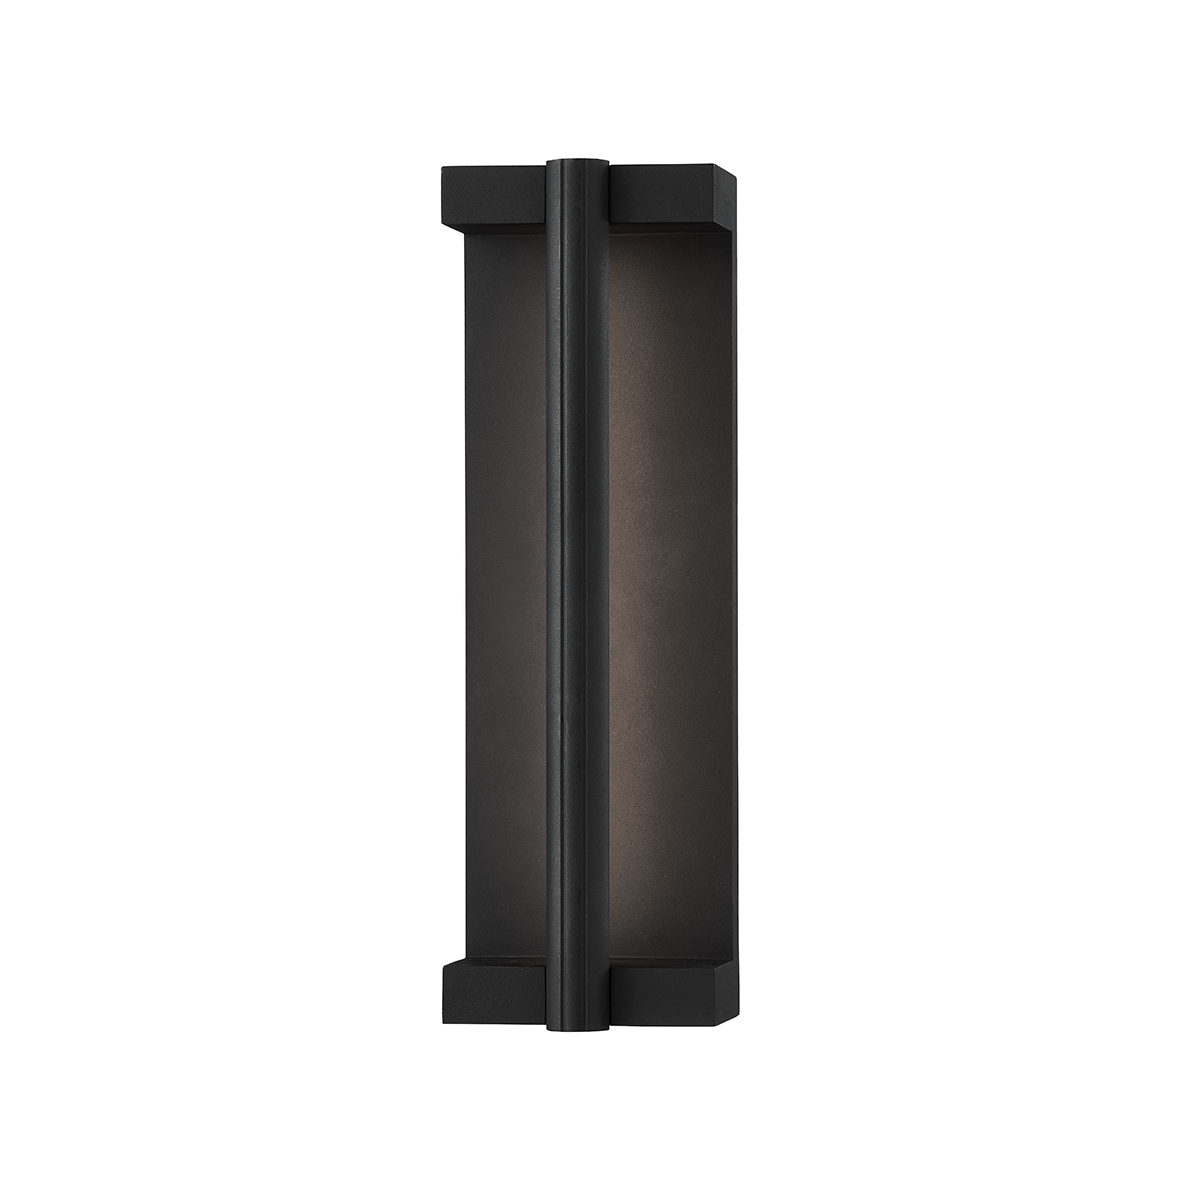 Troy Lighting 1 LIGHT SMALL EXTERIOR WALL SCONCE B1251